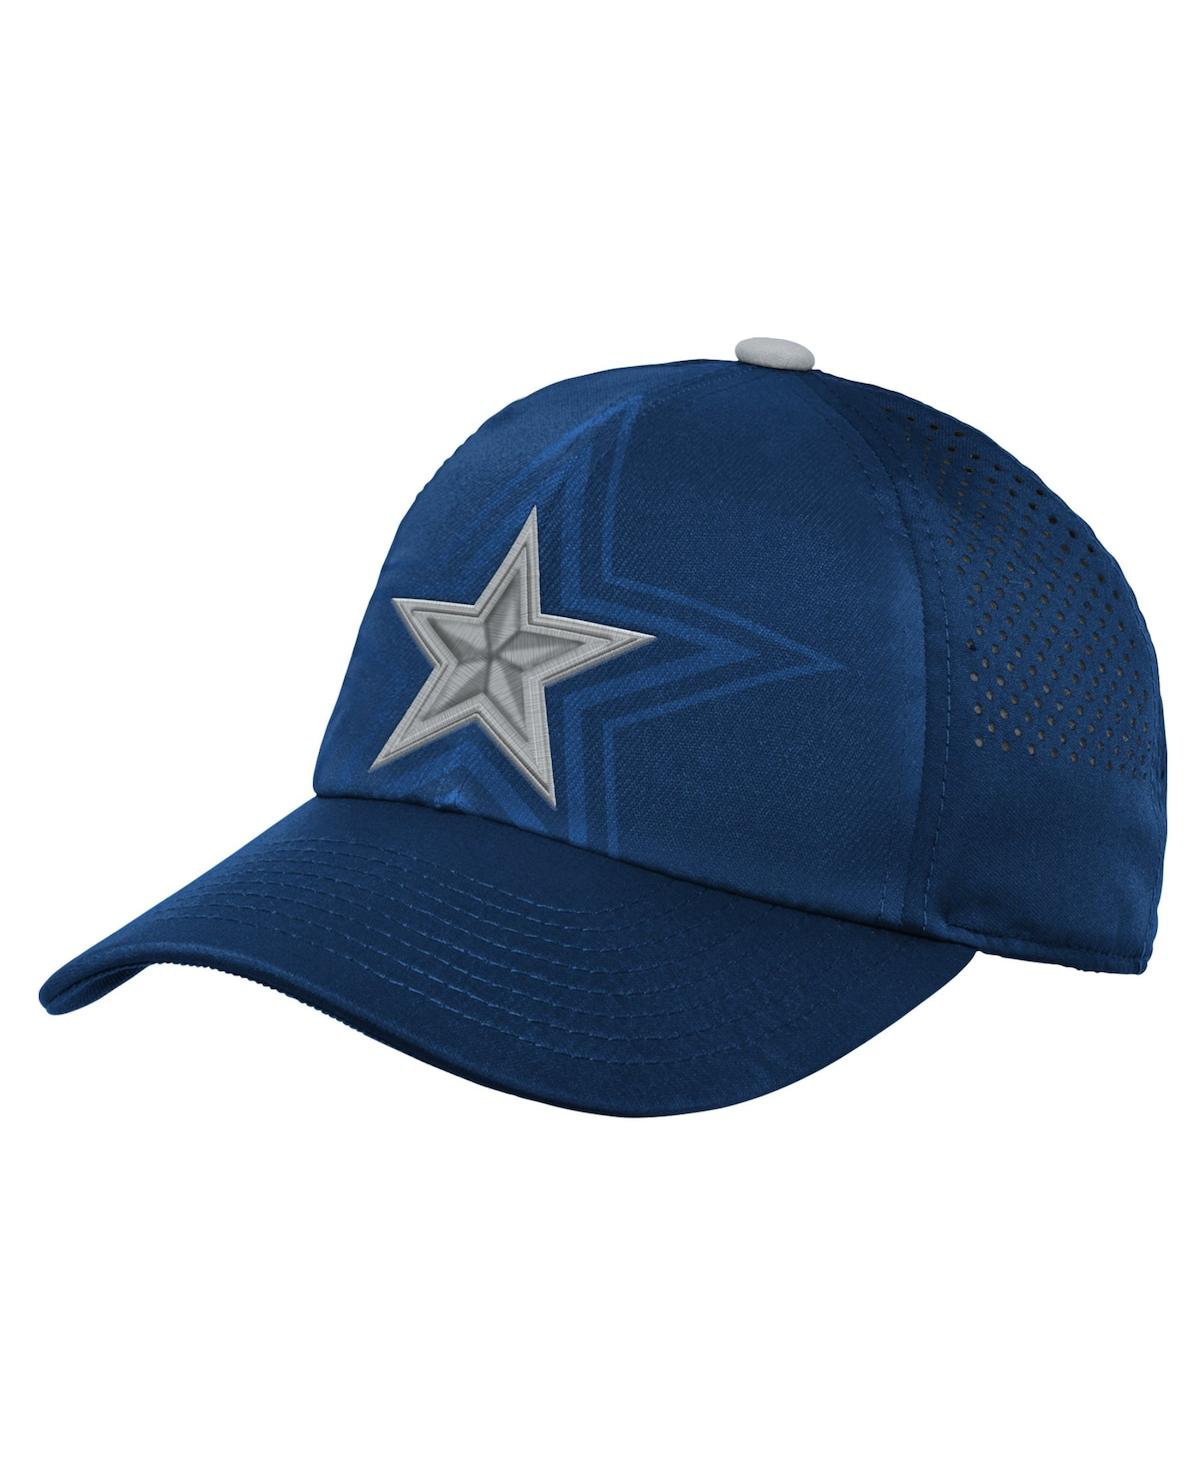 Outerstuff Kids' Youth Boys And Girls Navy Dallas Cowboys Trend Adjustable Hat